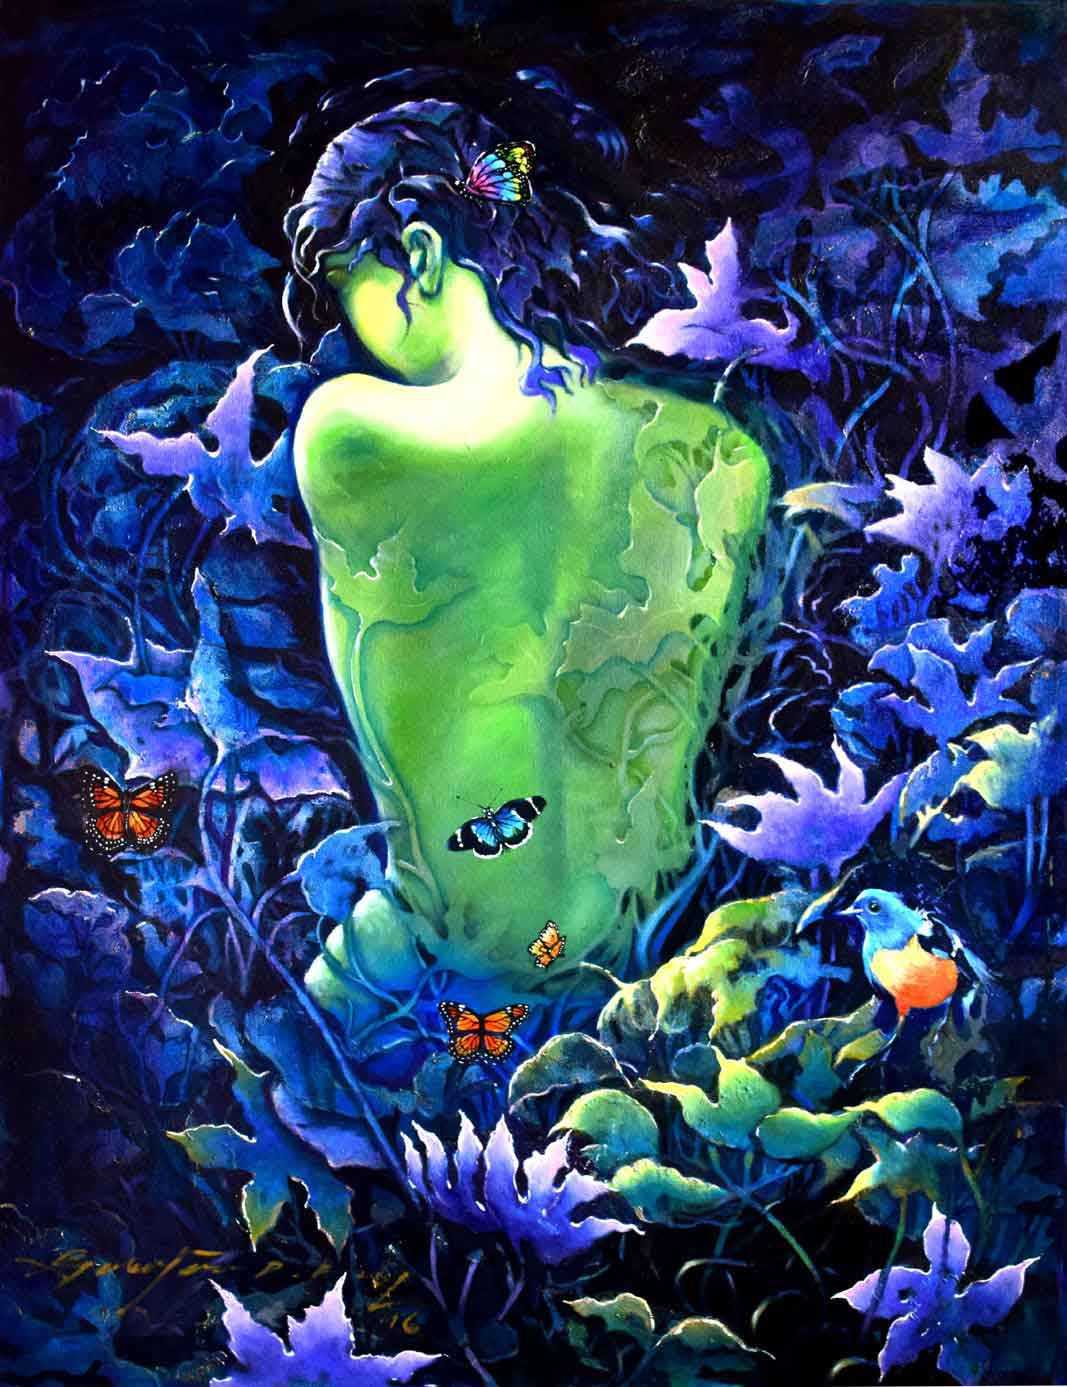 Semi Realistic Painting with Oil on Canvas "Moonlight Leaves" art by Gautam Partho Roy